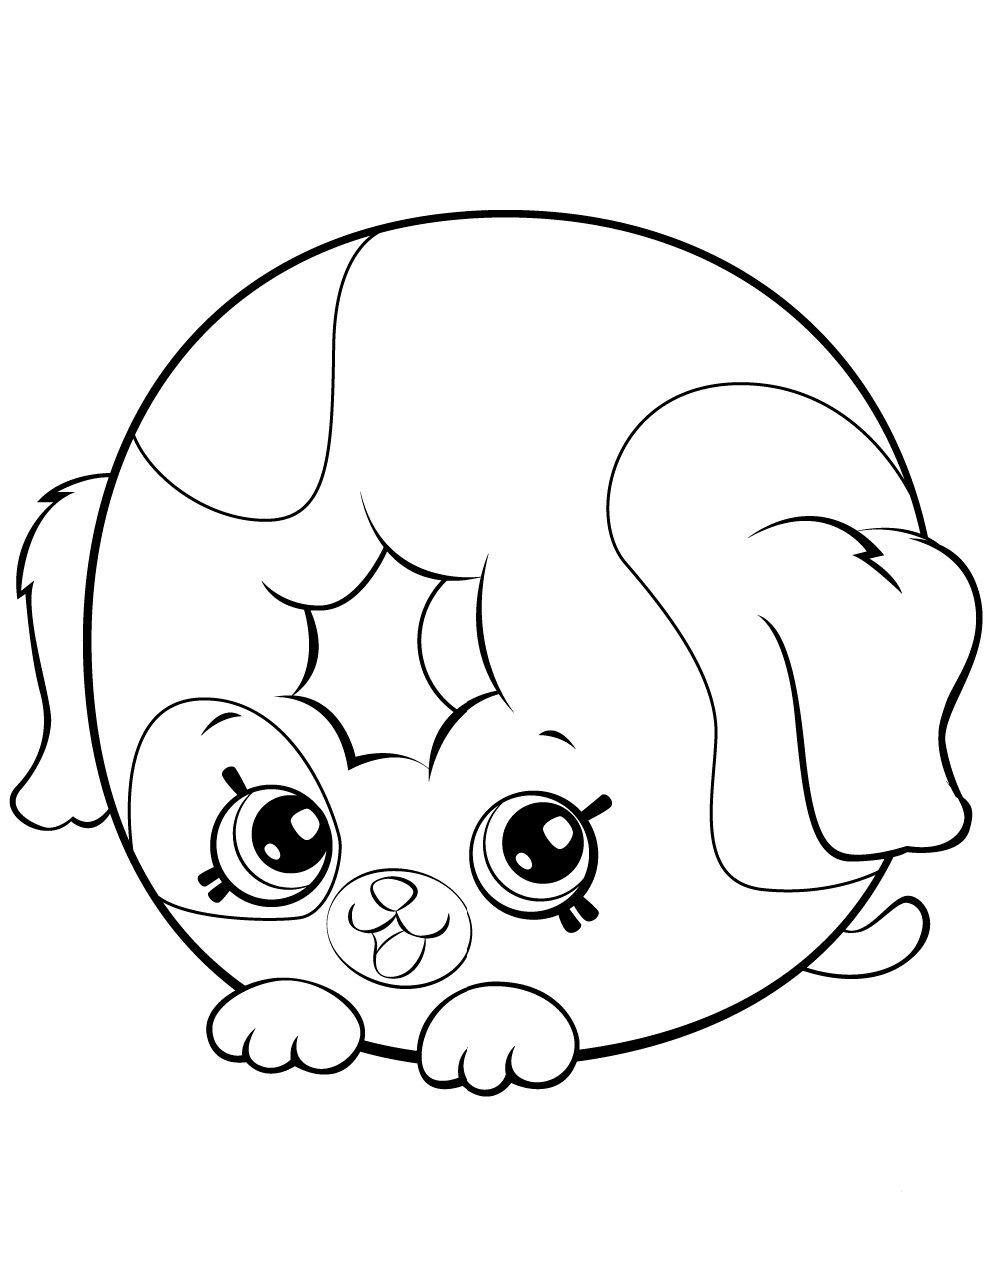 Dolly Donut Shopkin Season 5 Coloring Pages